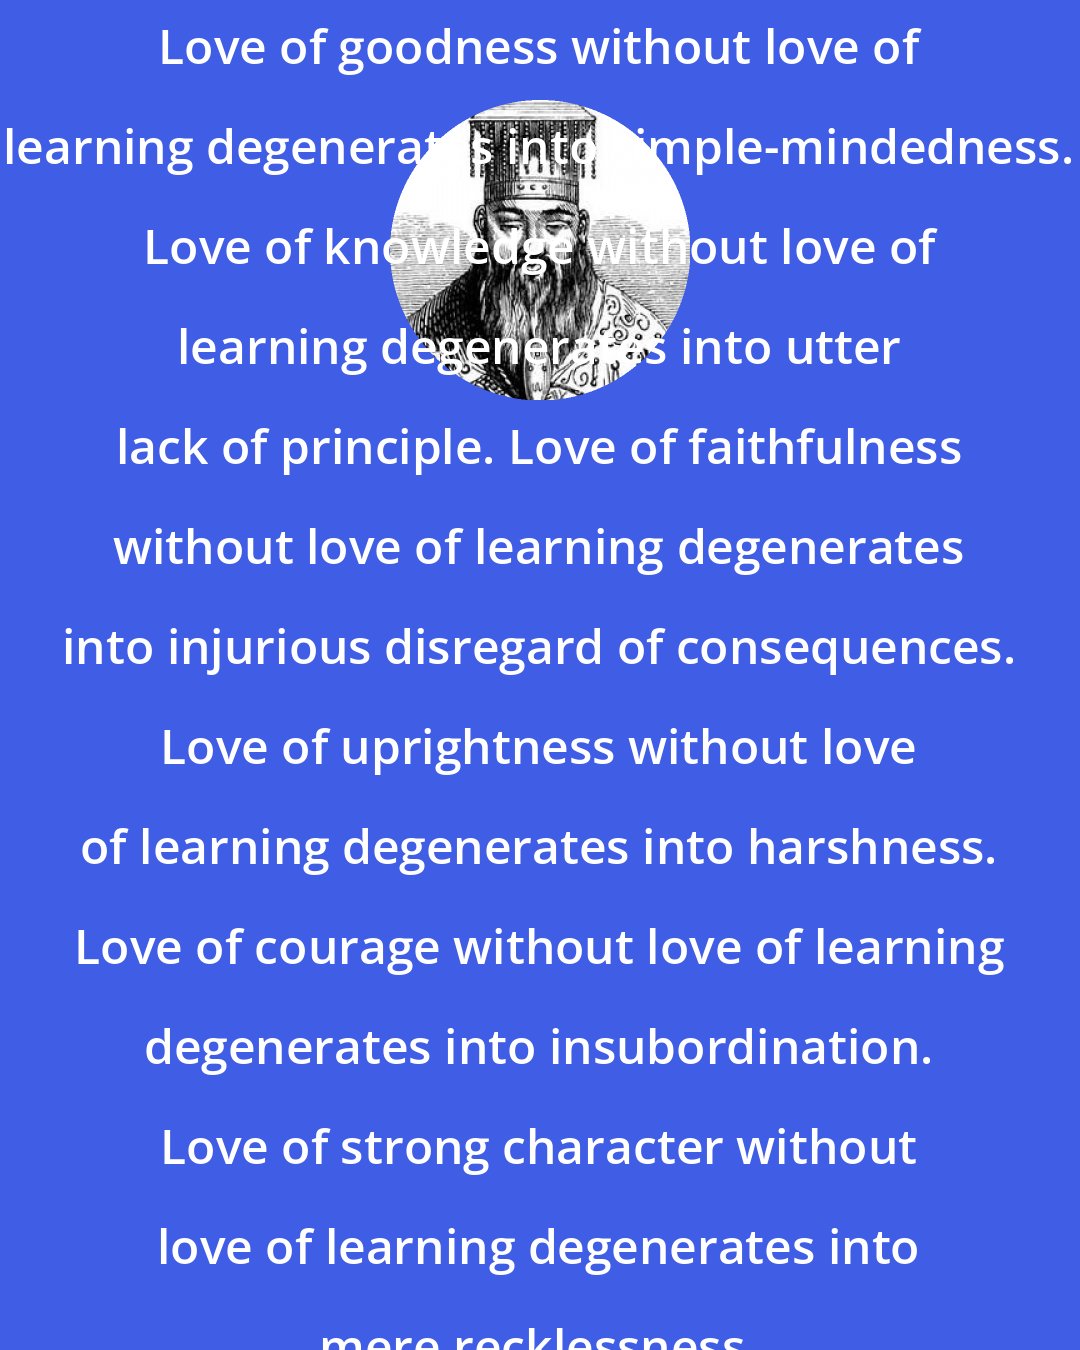 Confucius: Love of goodness without love of learning degenerates into simple-mindedness. Love of knowledge without love of learning degenerates into utter lack of principle. Love of faithfulness without love of learning degenerates into injurious disregard of consequences. Love of uprightness without love of learning degenerates into harshness. Love of courage without love of learning degenerates into insubordination. Love of strong character without love of learning degenerates into mere recklessness.